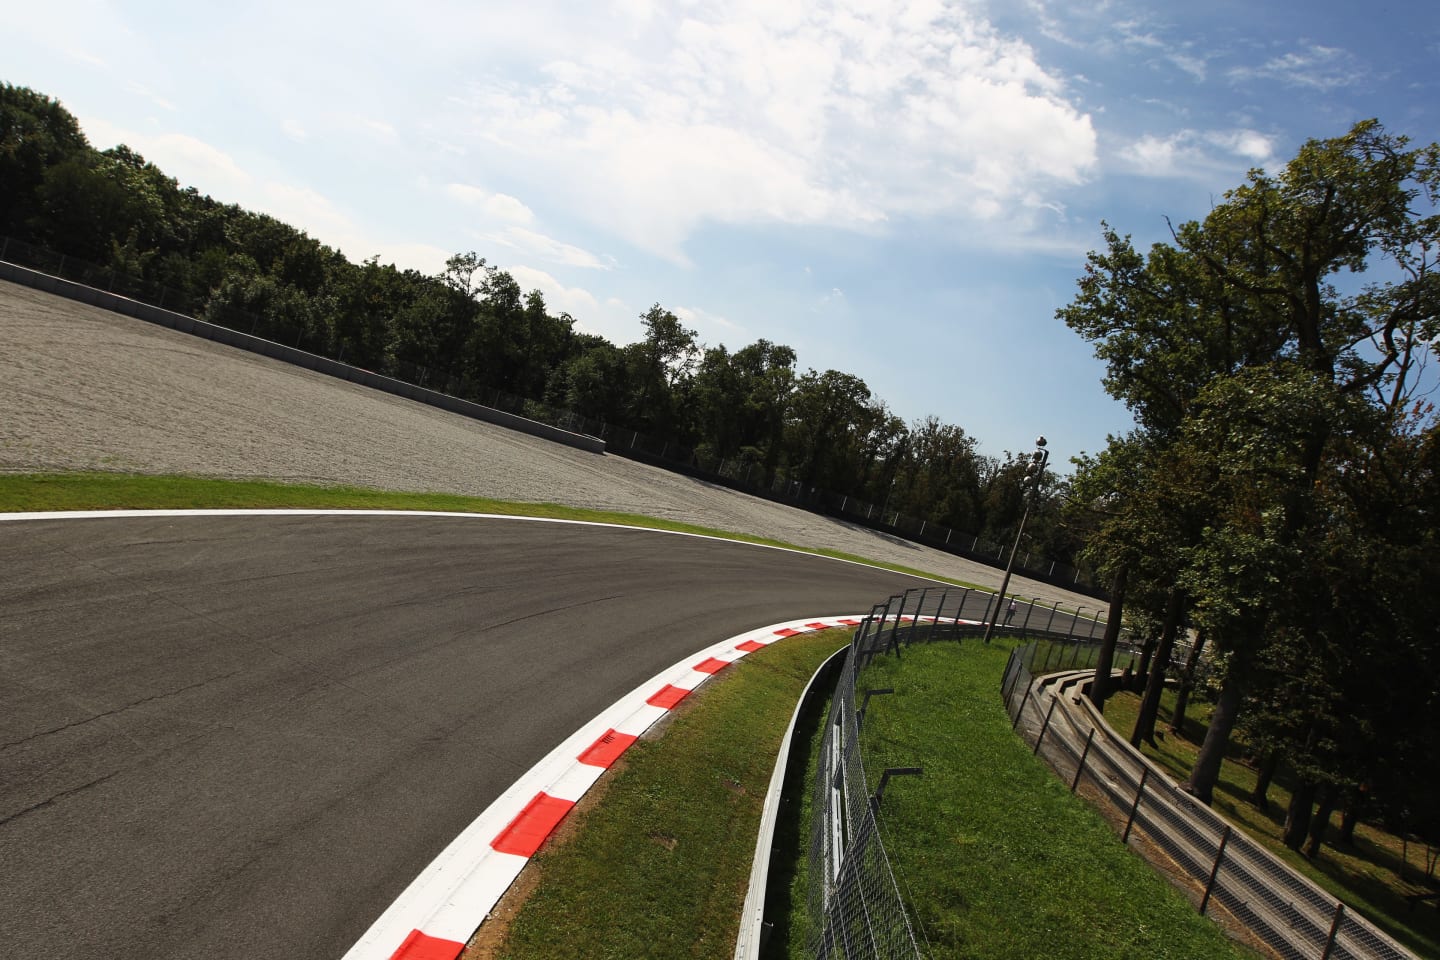 MONZA, ITALY - SEPTEMBER 09:  General view of the Parabolica corner during previews to the Italian